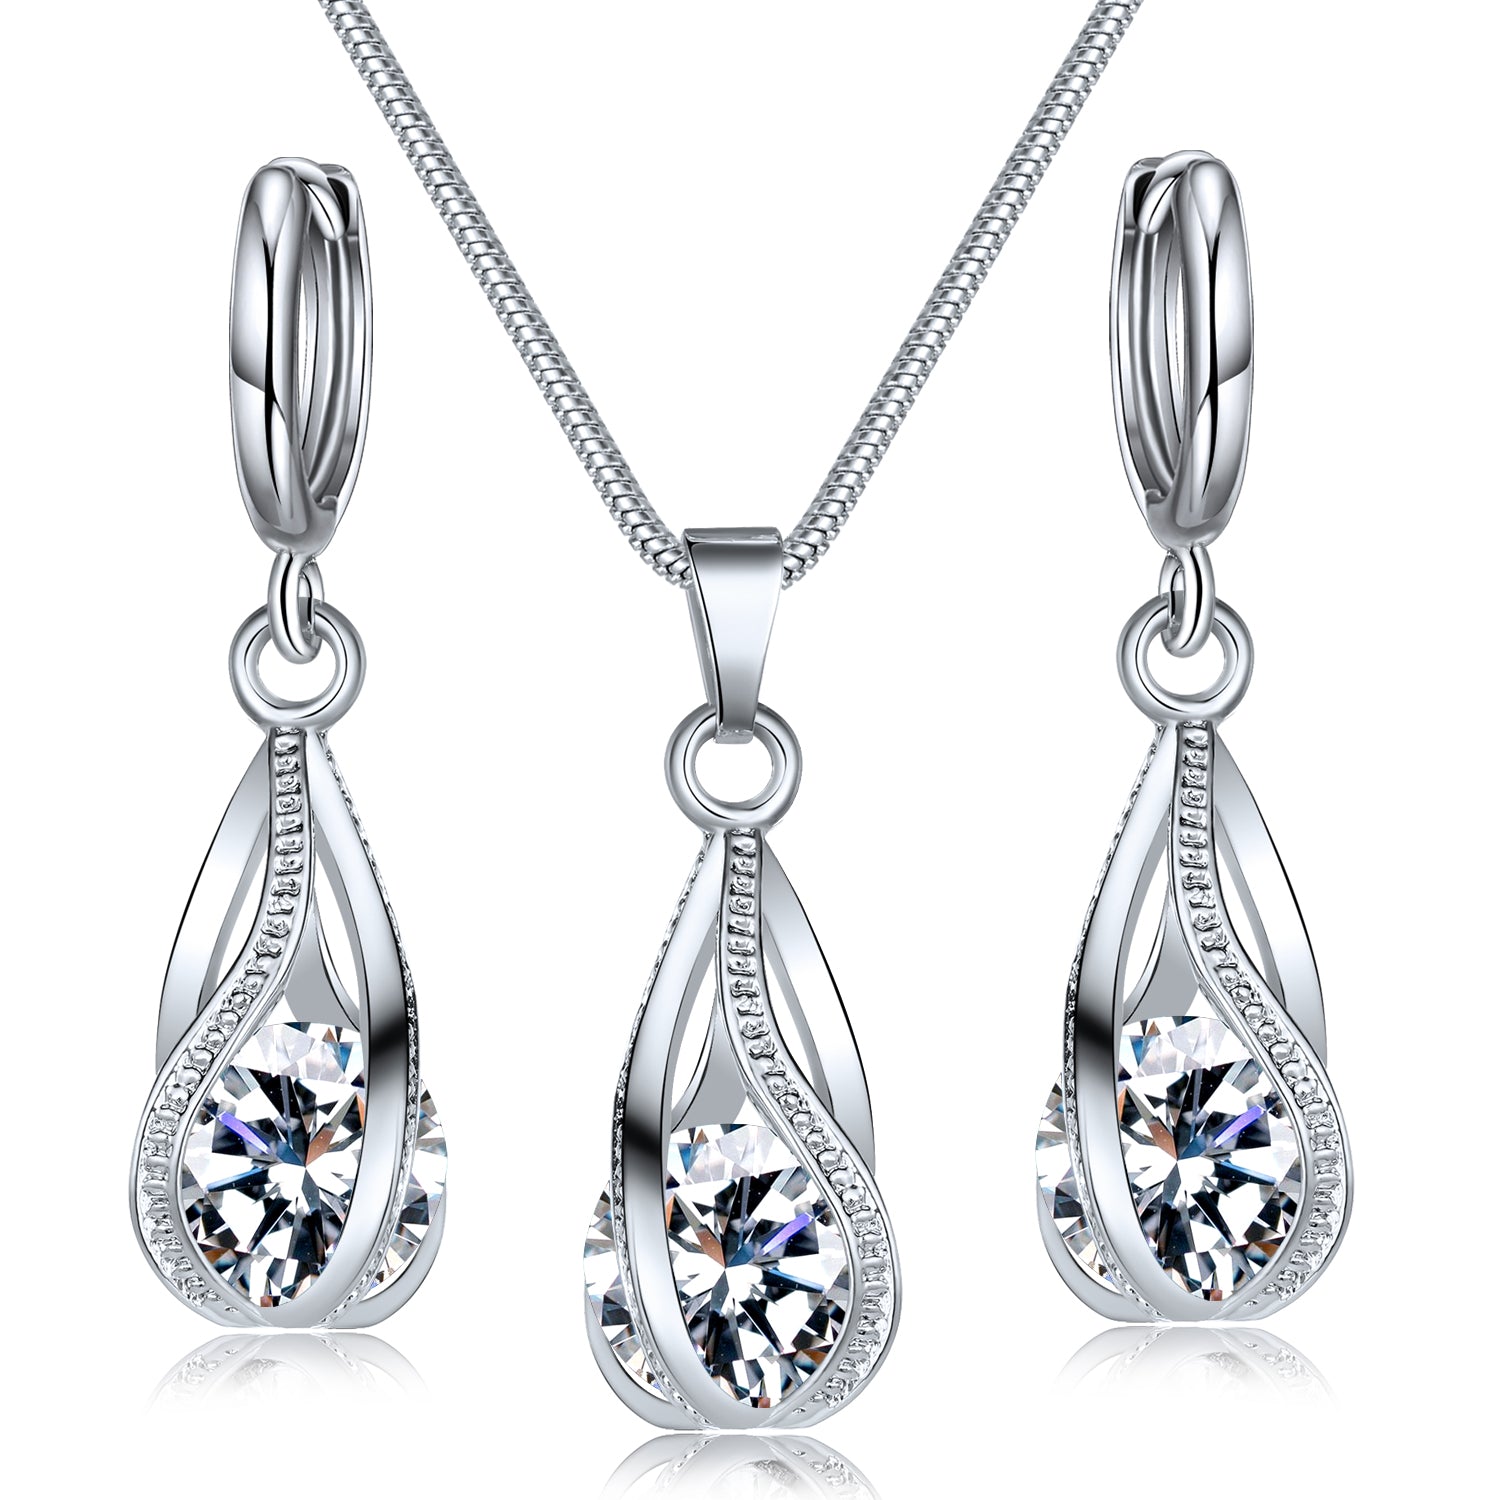 Shine Bright Like a Diamond with our 3-Piece Faux Crystal Earrings and Necklace Set